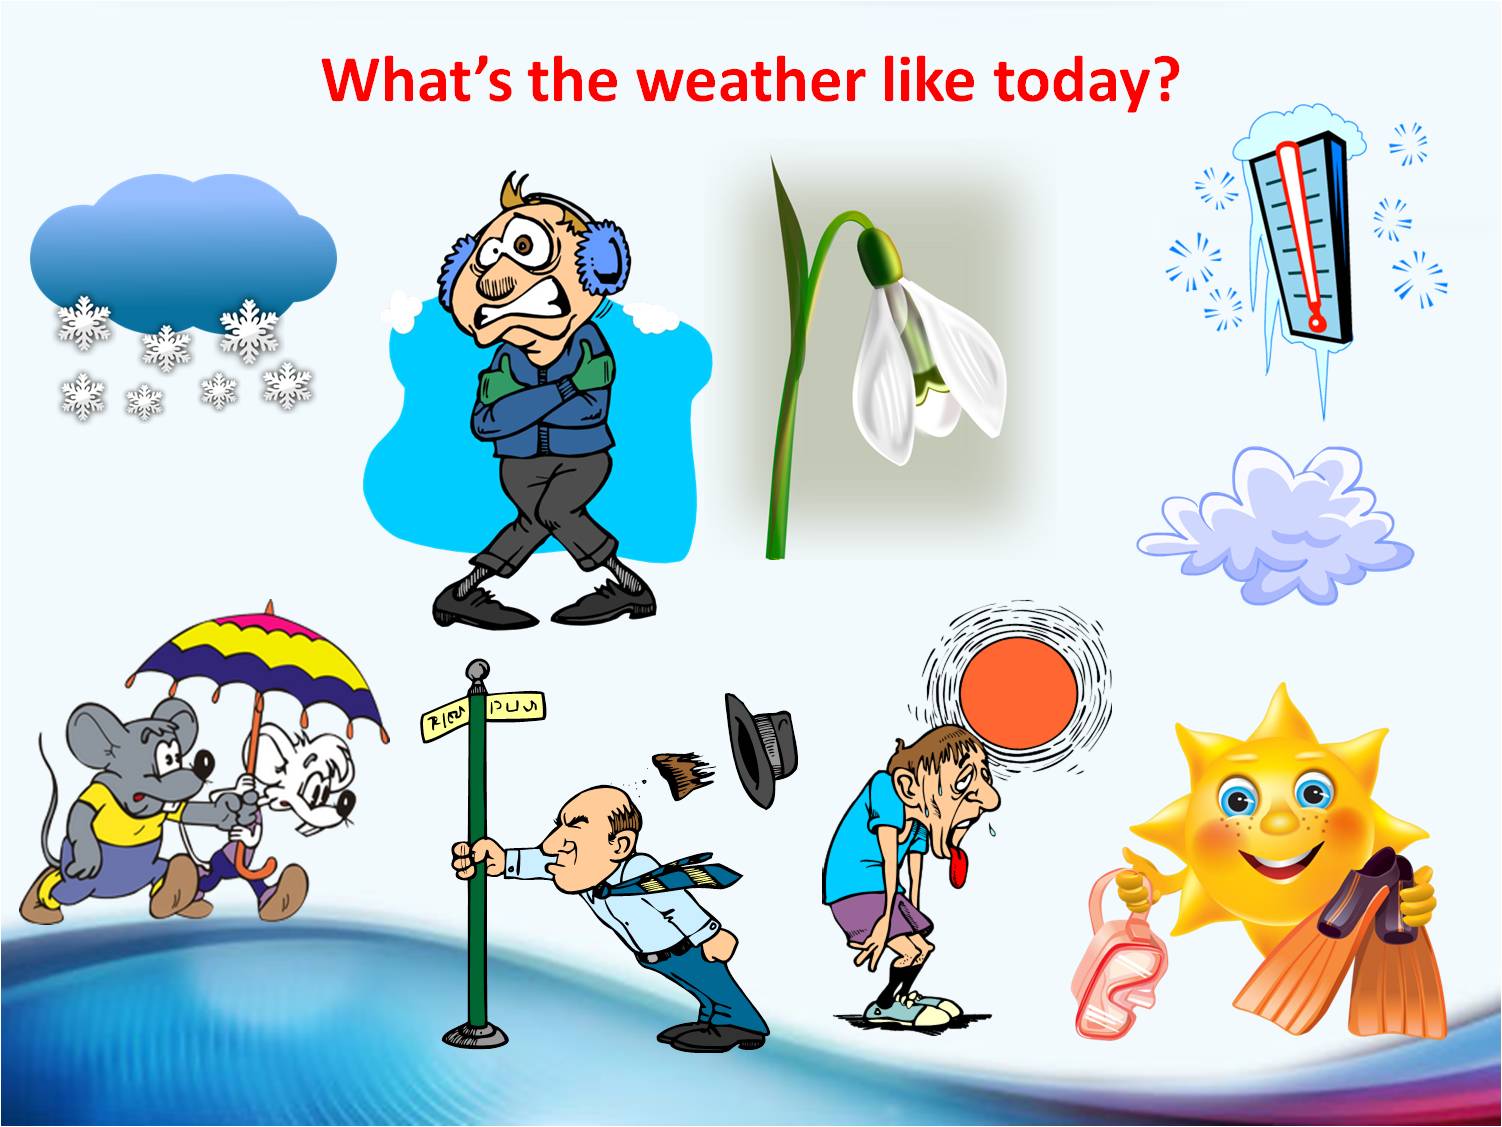 How the weather. What the weather like today. What is the weather today. What`s the weather like today. Картинки для детей what is the weather today.